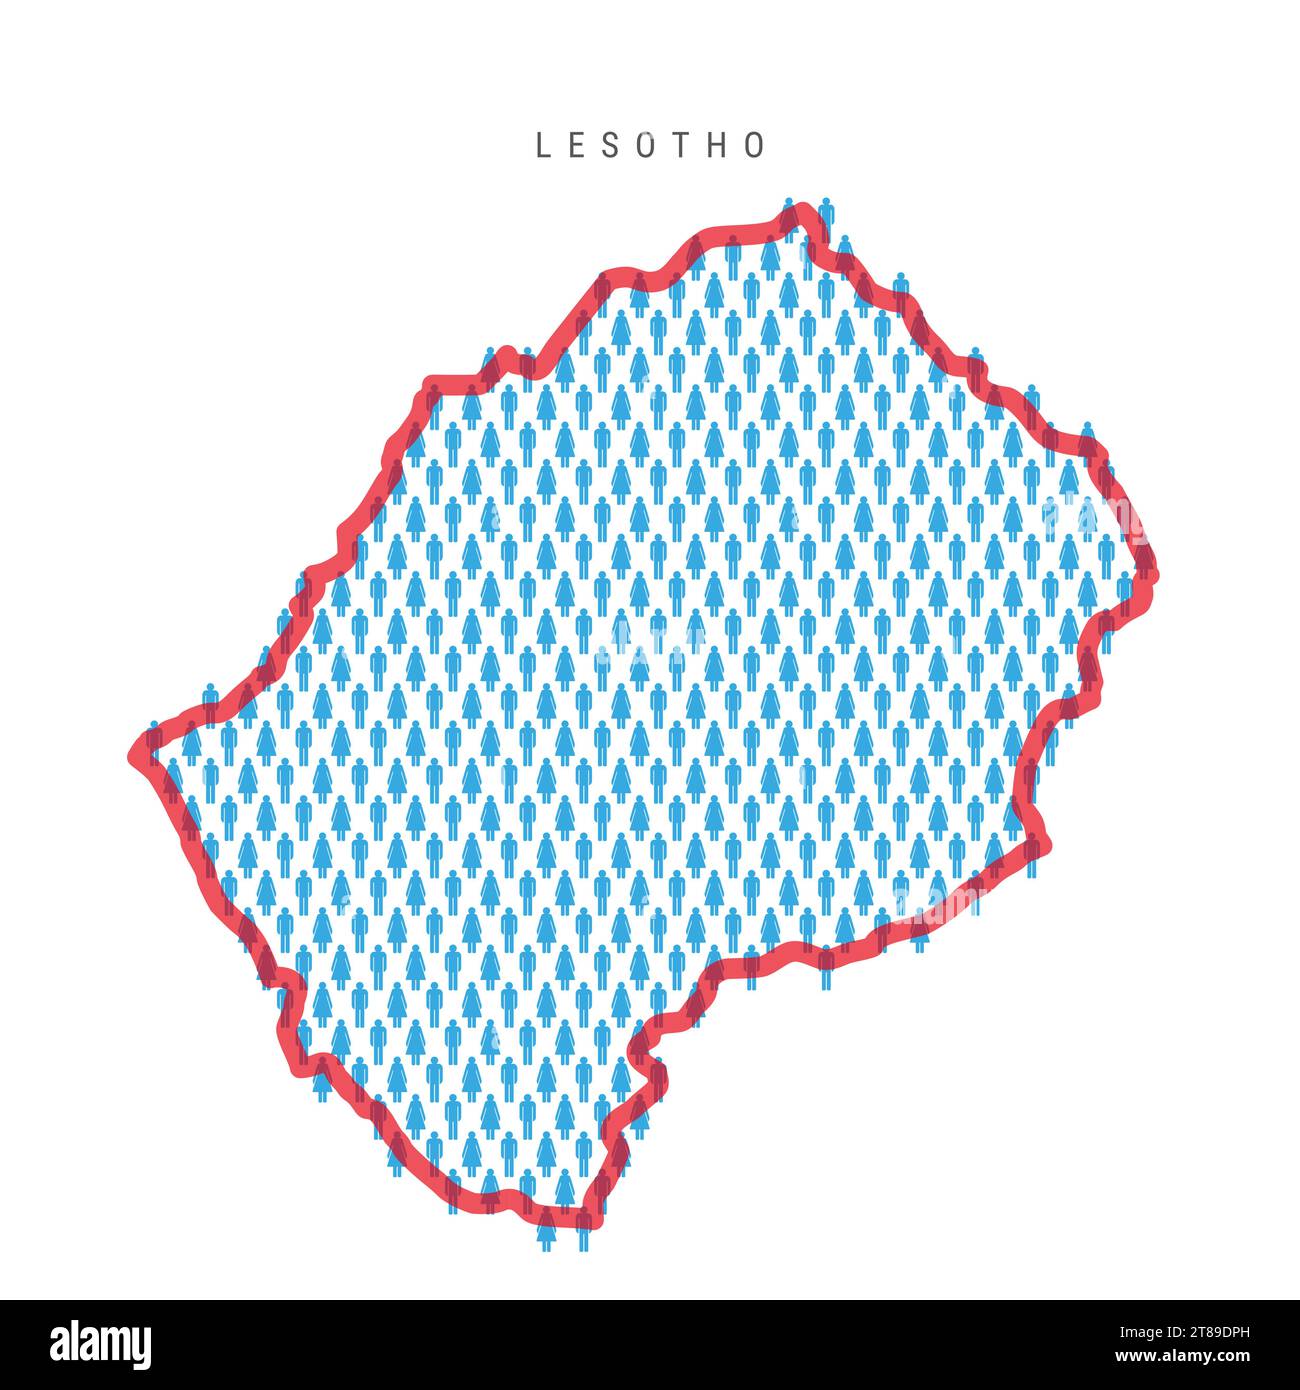 Lesotho population map. Stick figures Lesotho people map with bold red translucent country border. Pattern of men and women icons. Isolated vector ill Stock Vector